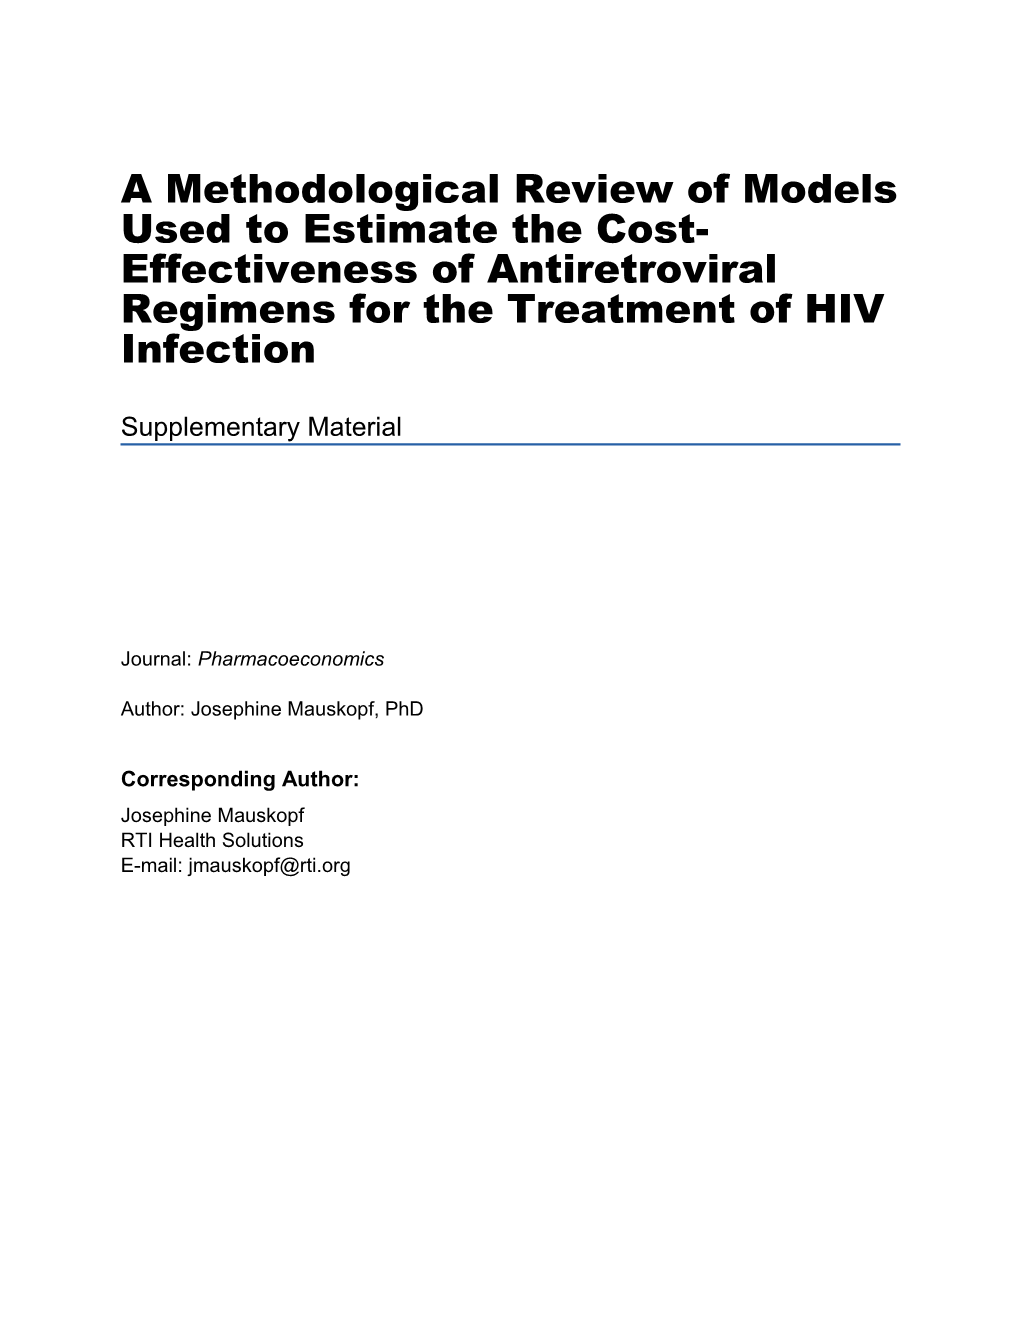 A Methodological Review of Models Used to Estimate the Cost-Effectiveness of Antiretroviral